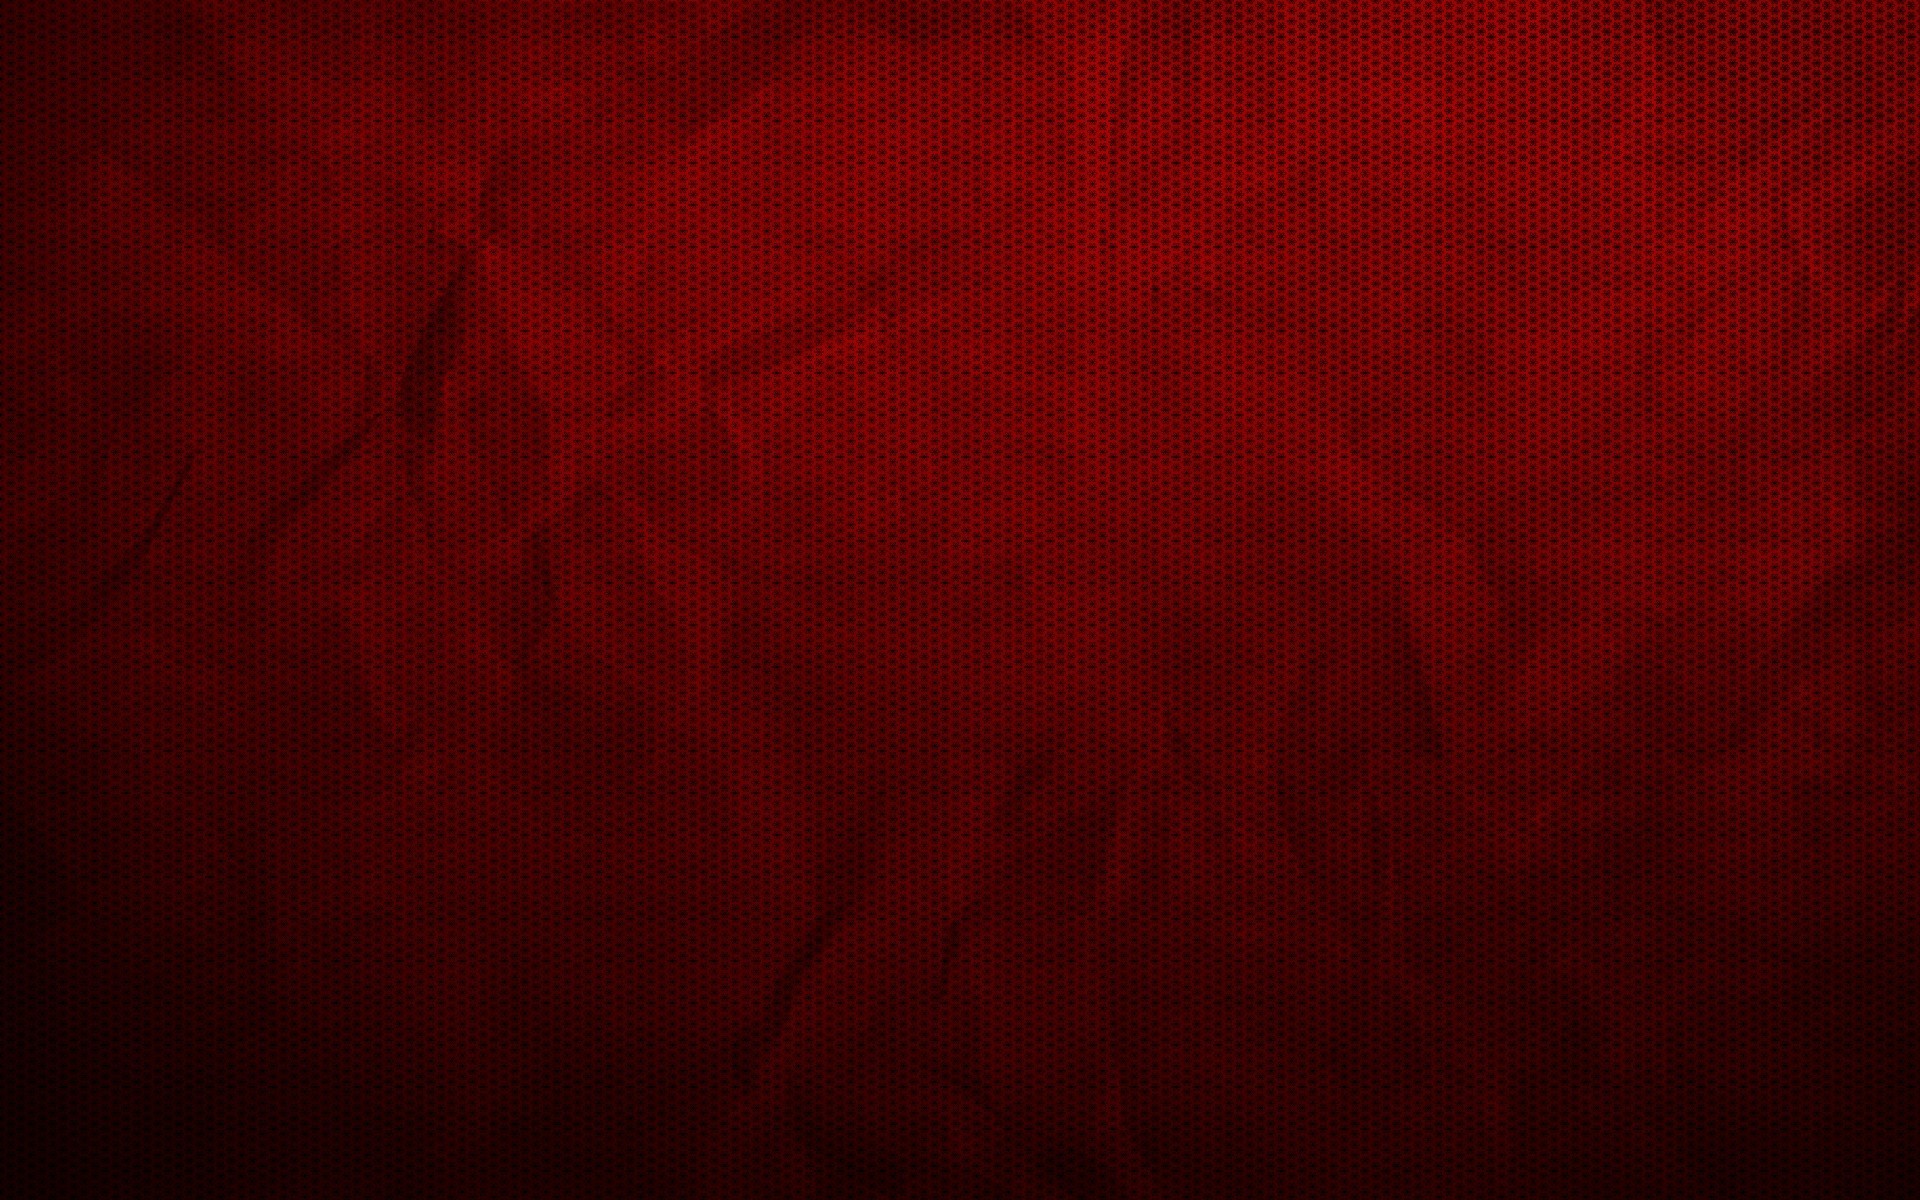 1920x1200 Marun dark red color plain background hd wallpapers gallery | Black .